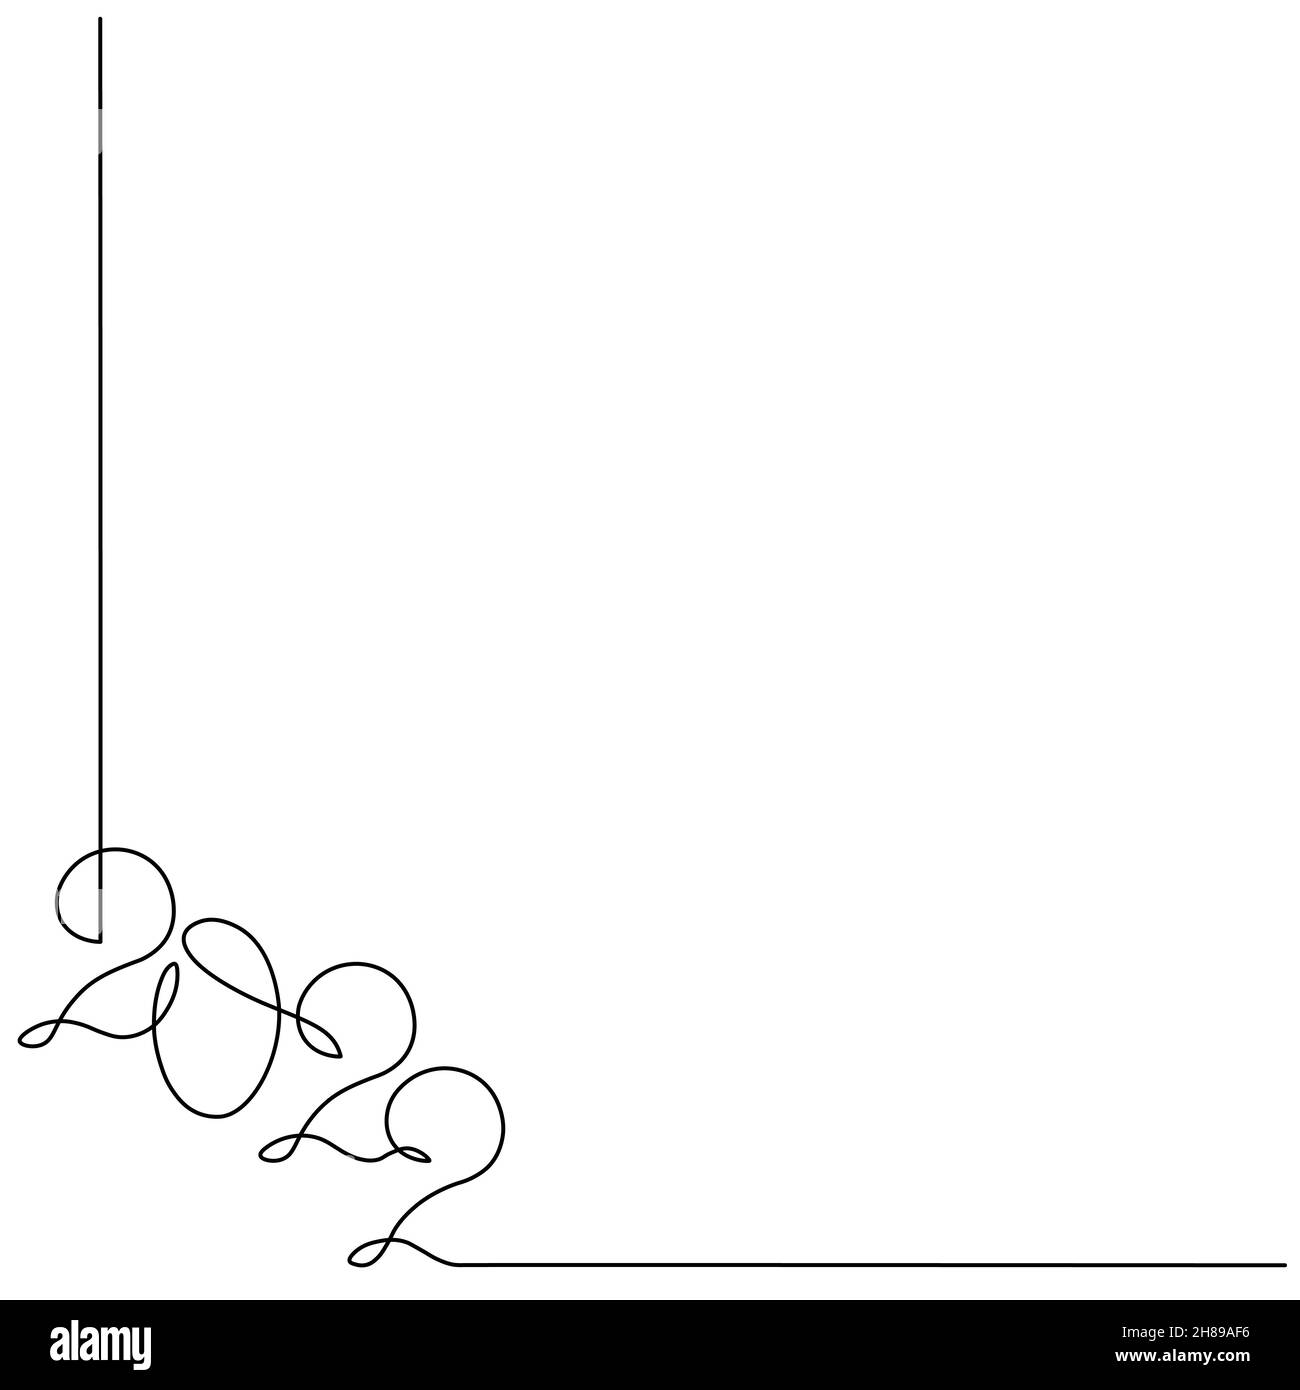 Continuous line 2022 lettering. Single path drawing. Vector ...